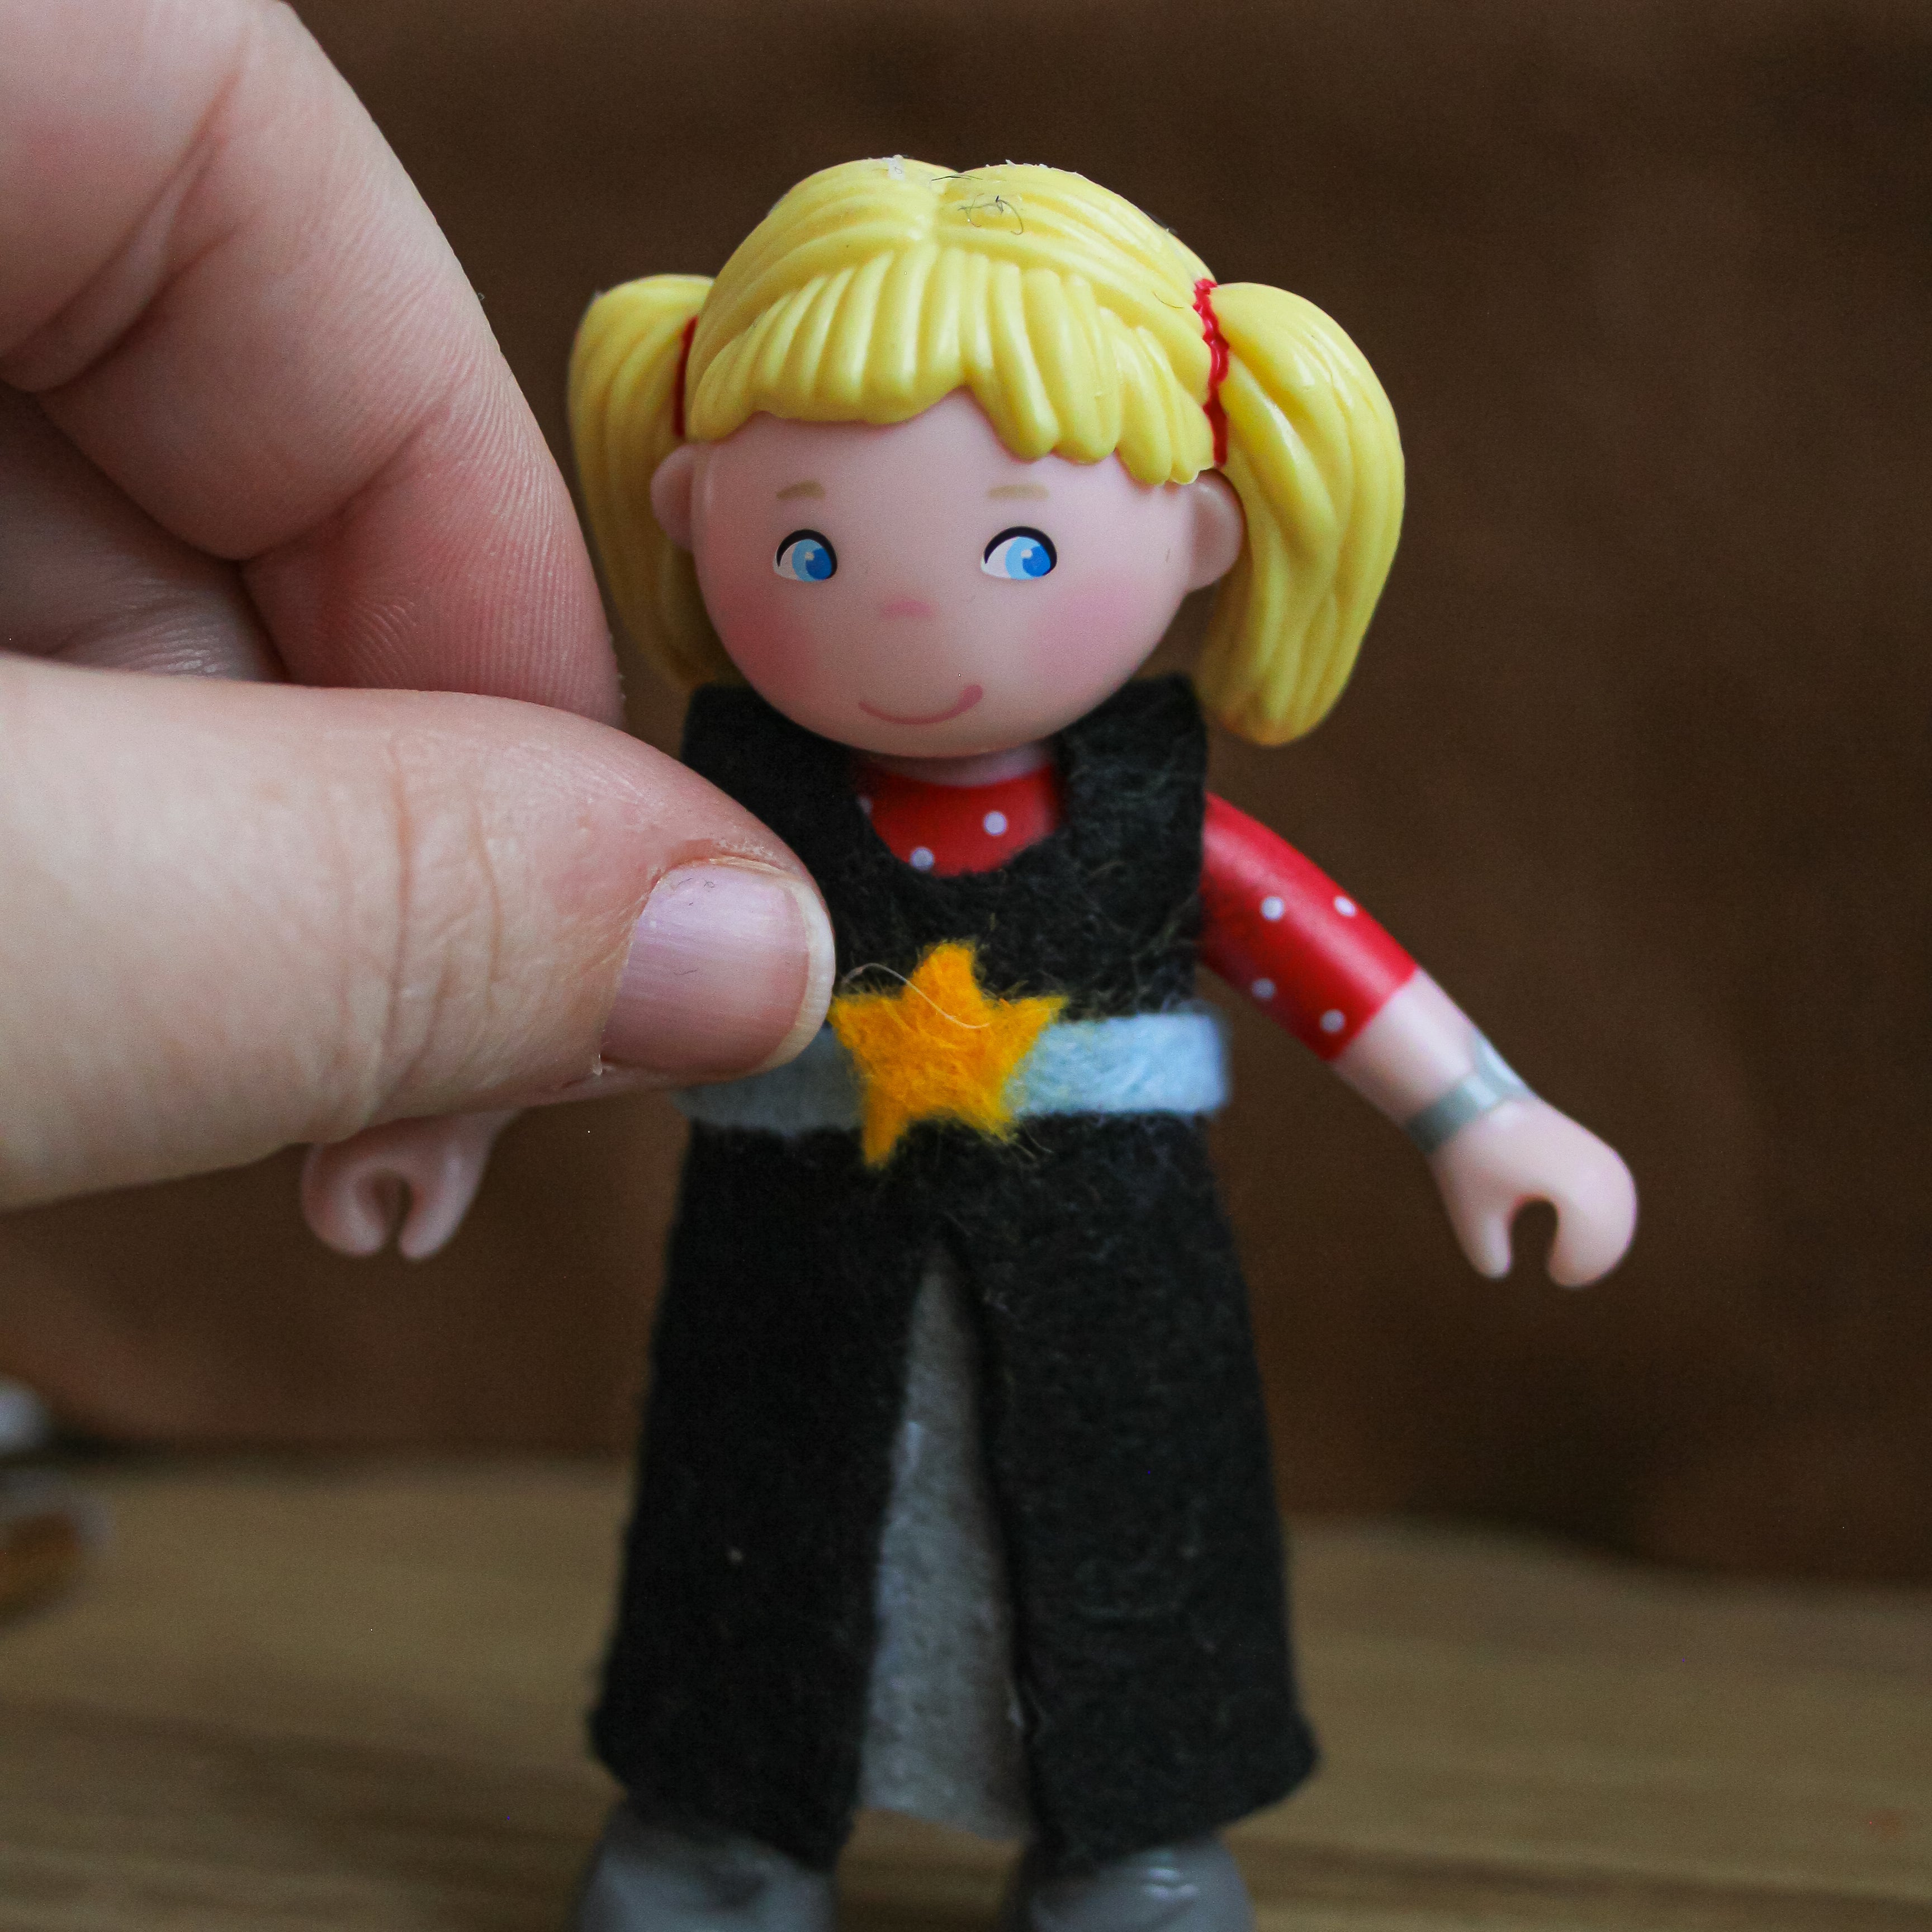 A star is being added to the front of a felted dress.